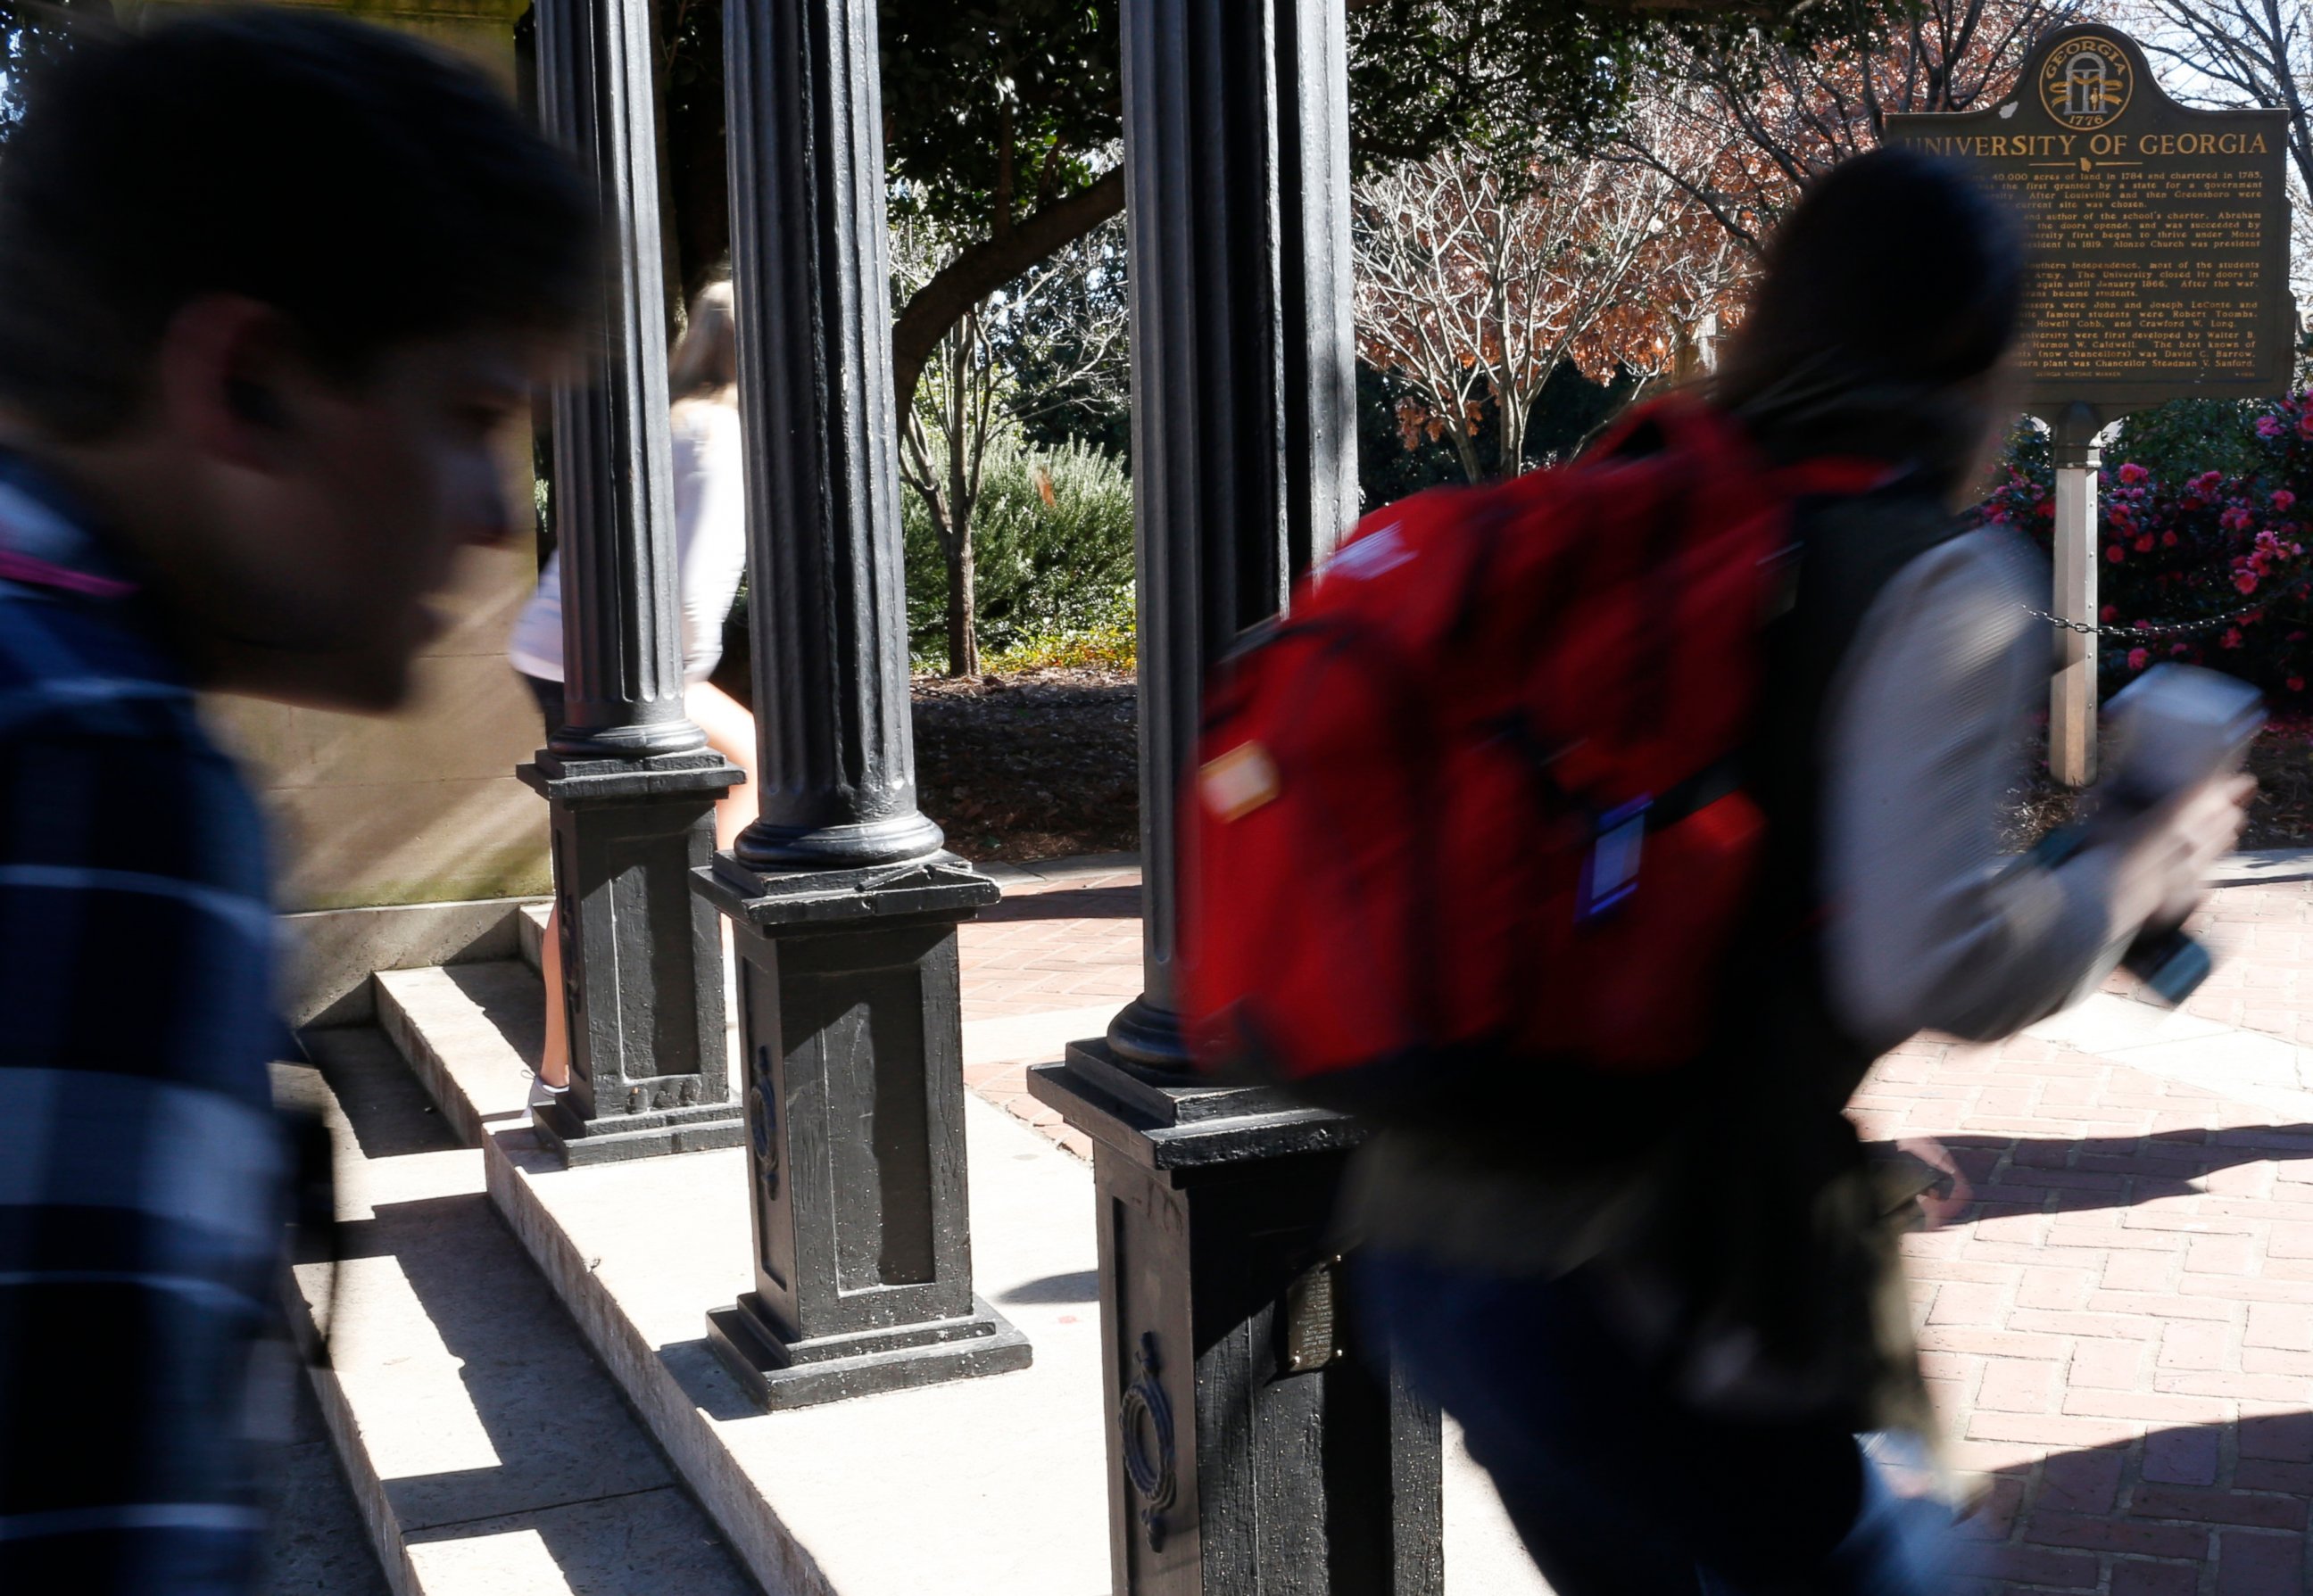 PHOTO: In this Jan. 9, 2019, file photo University of Georgia undergraduate students avoid walking under the university arch on the first day of the spring semester in Athens, Ga.